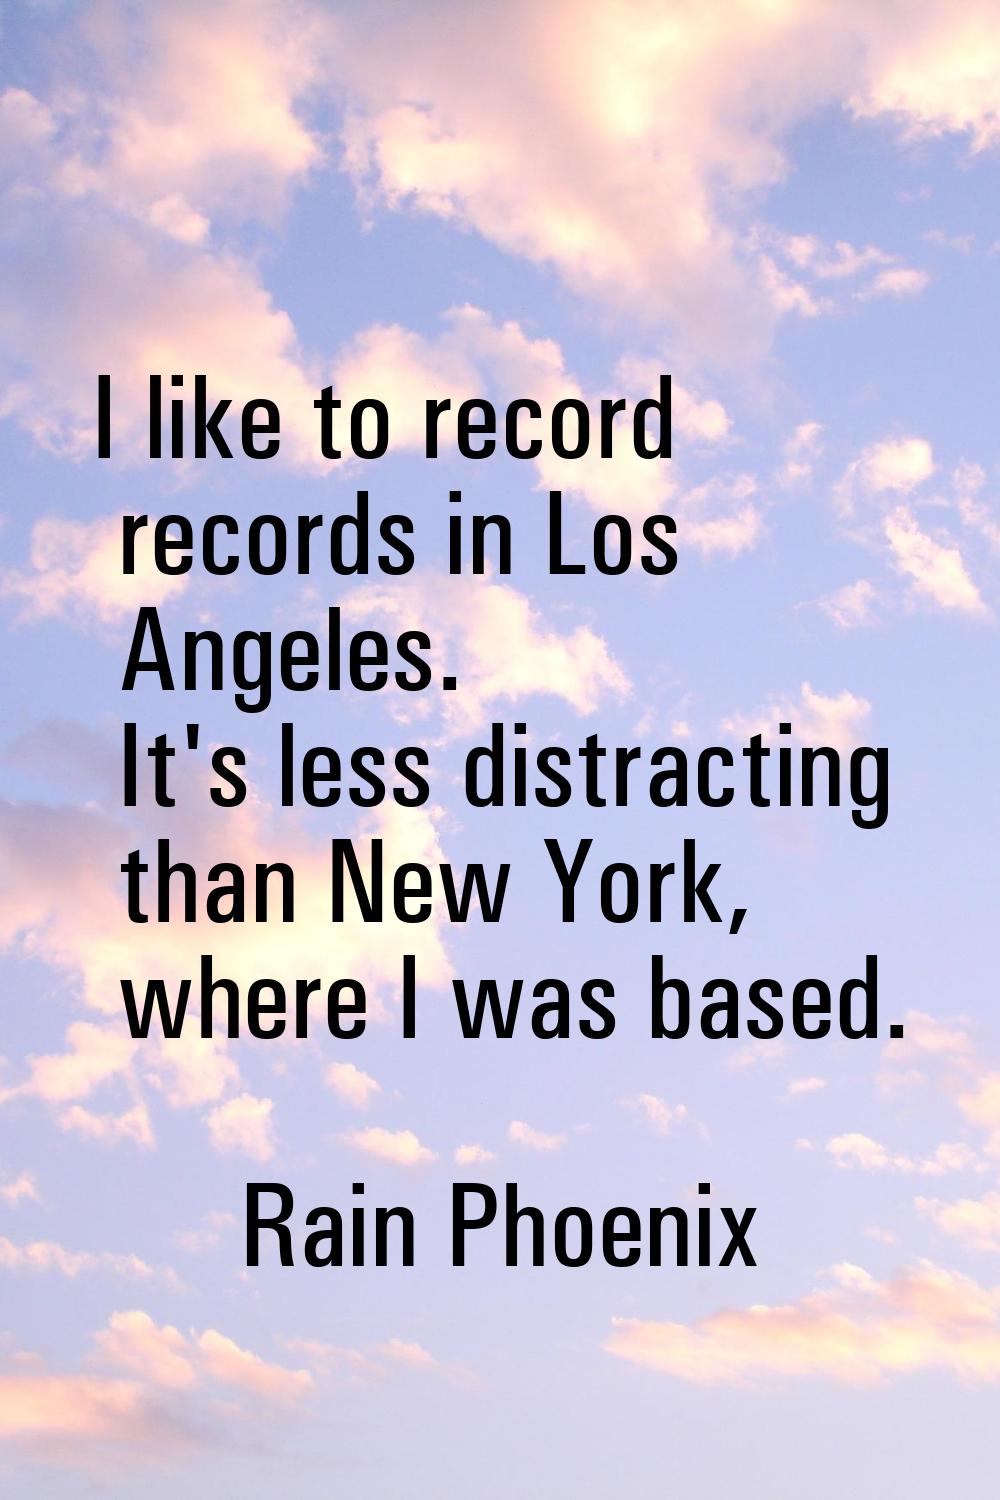 I like to record records in Los Angeles. It's less distracting than New York, where I was based.